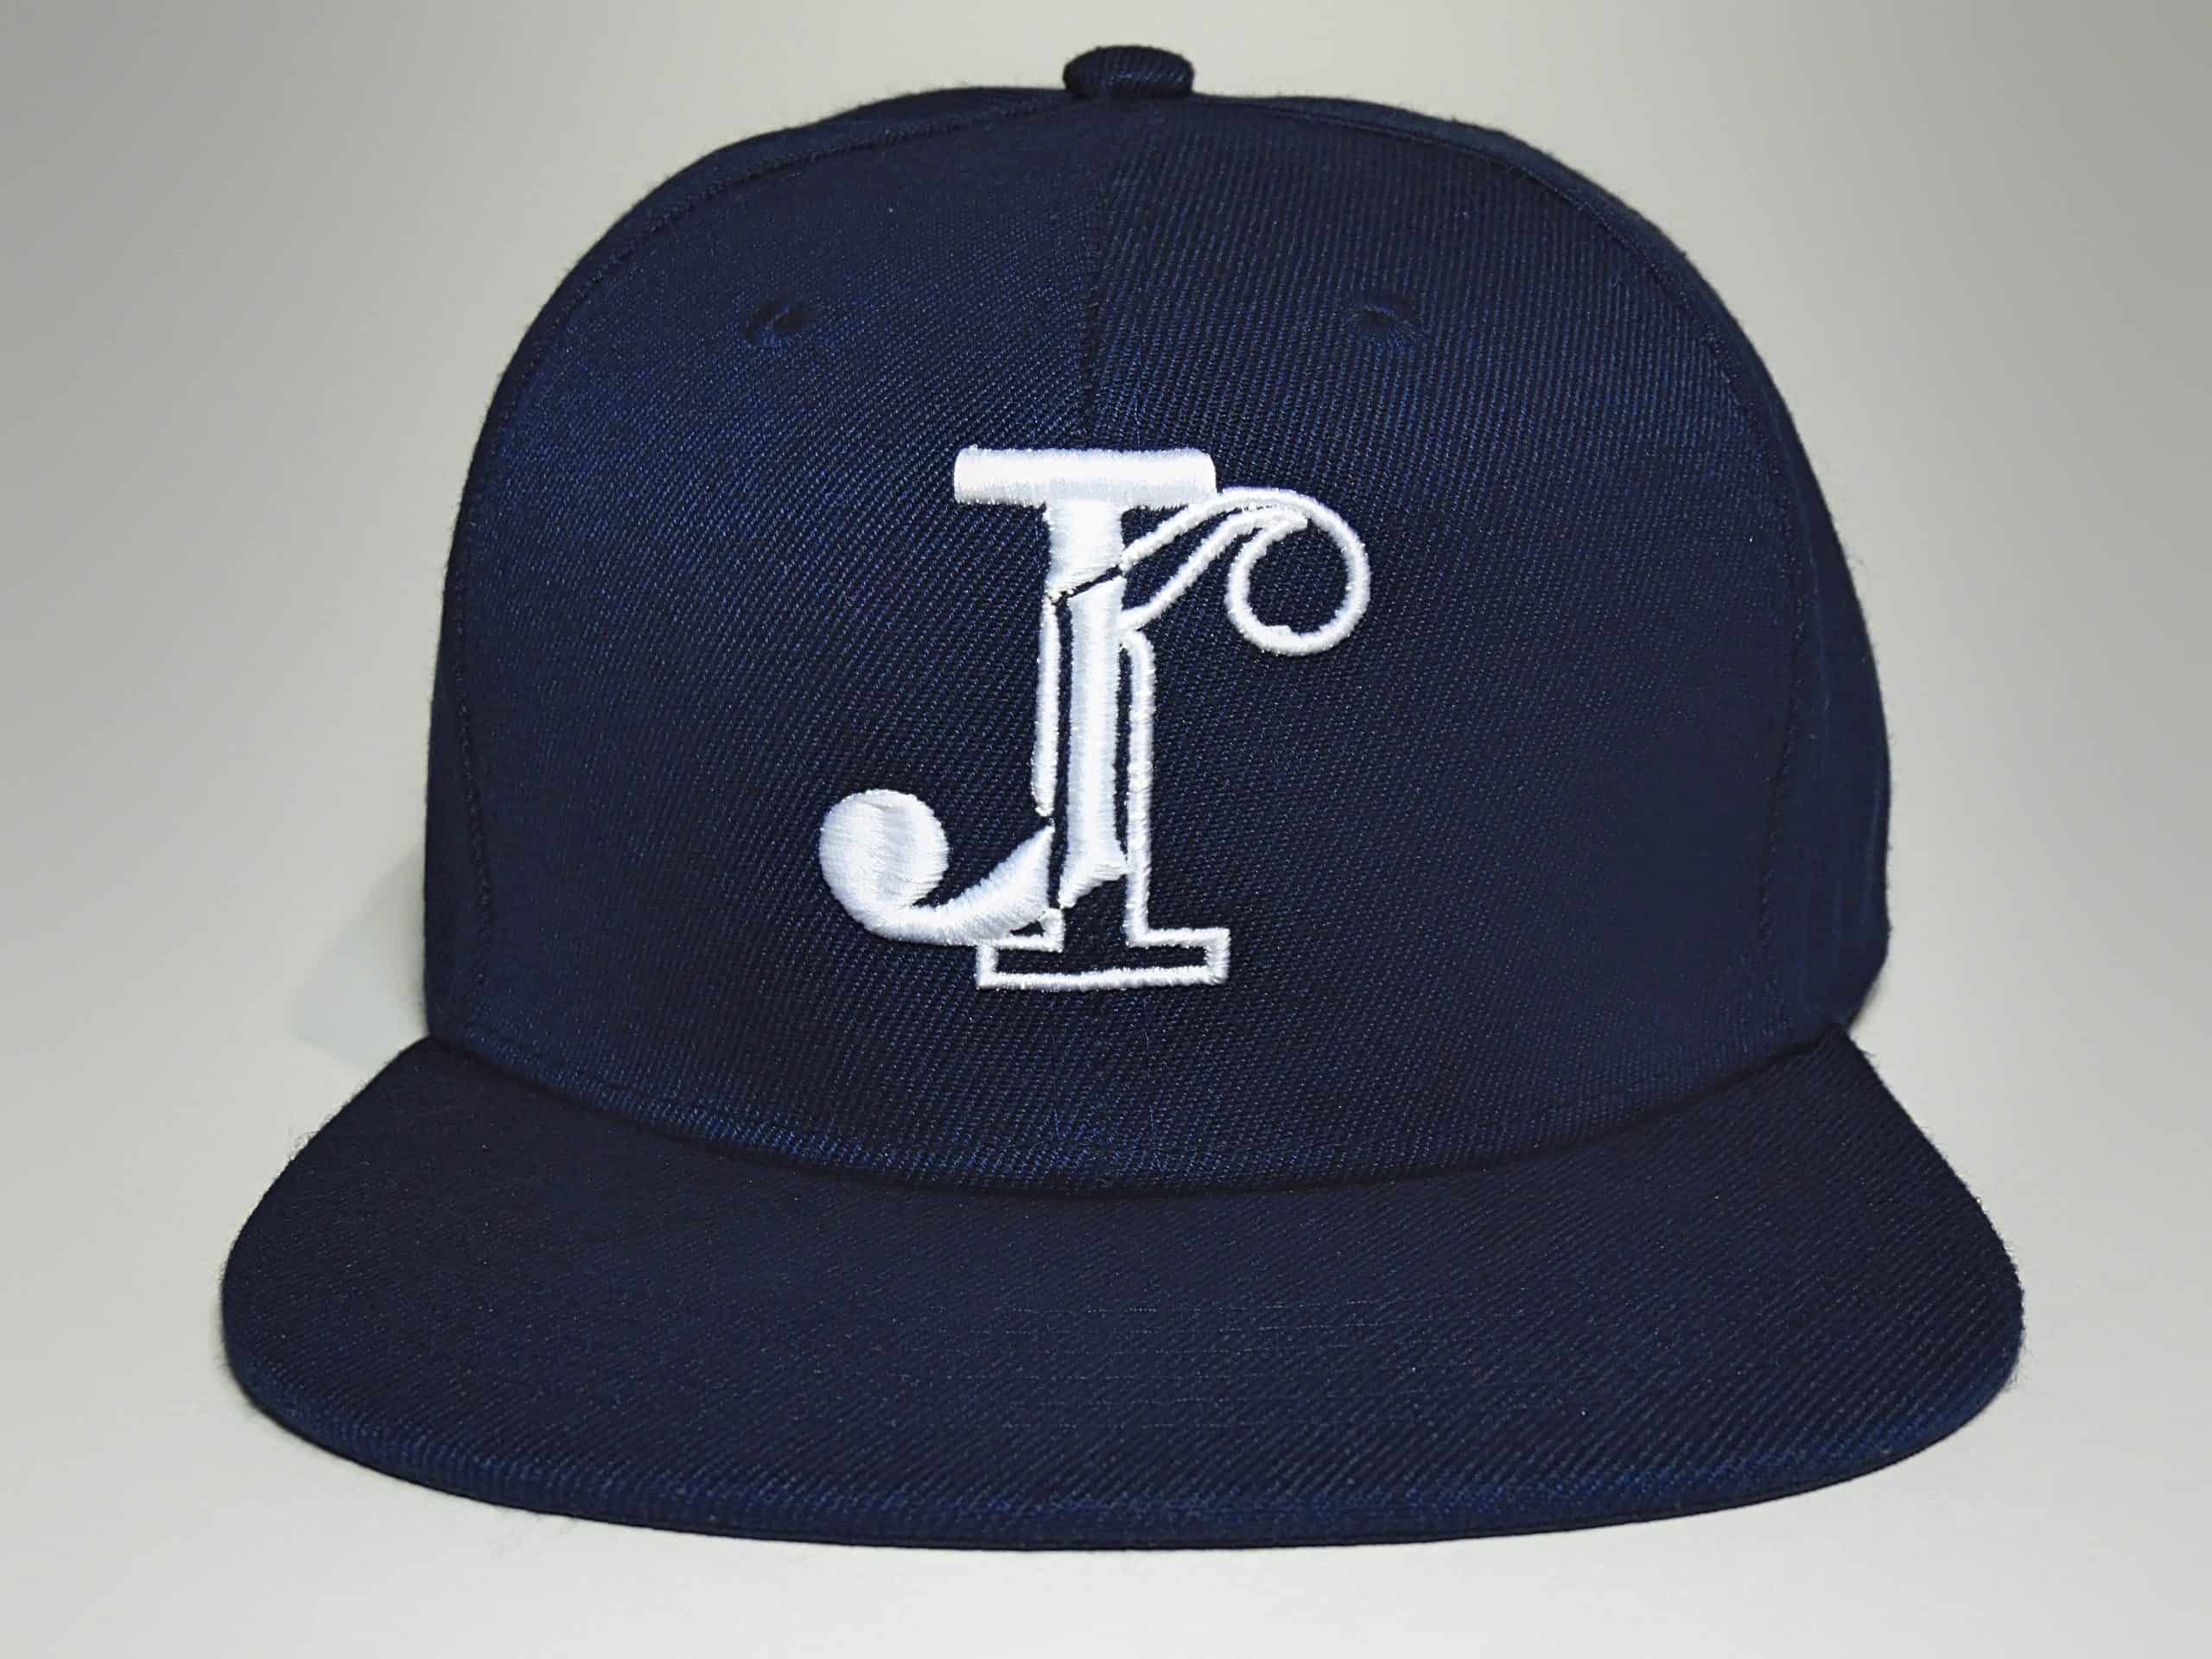 Jean-Jacques Navy Blue with White lettering, Snapback Baseball Cap